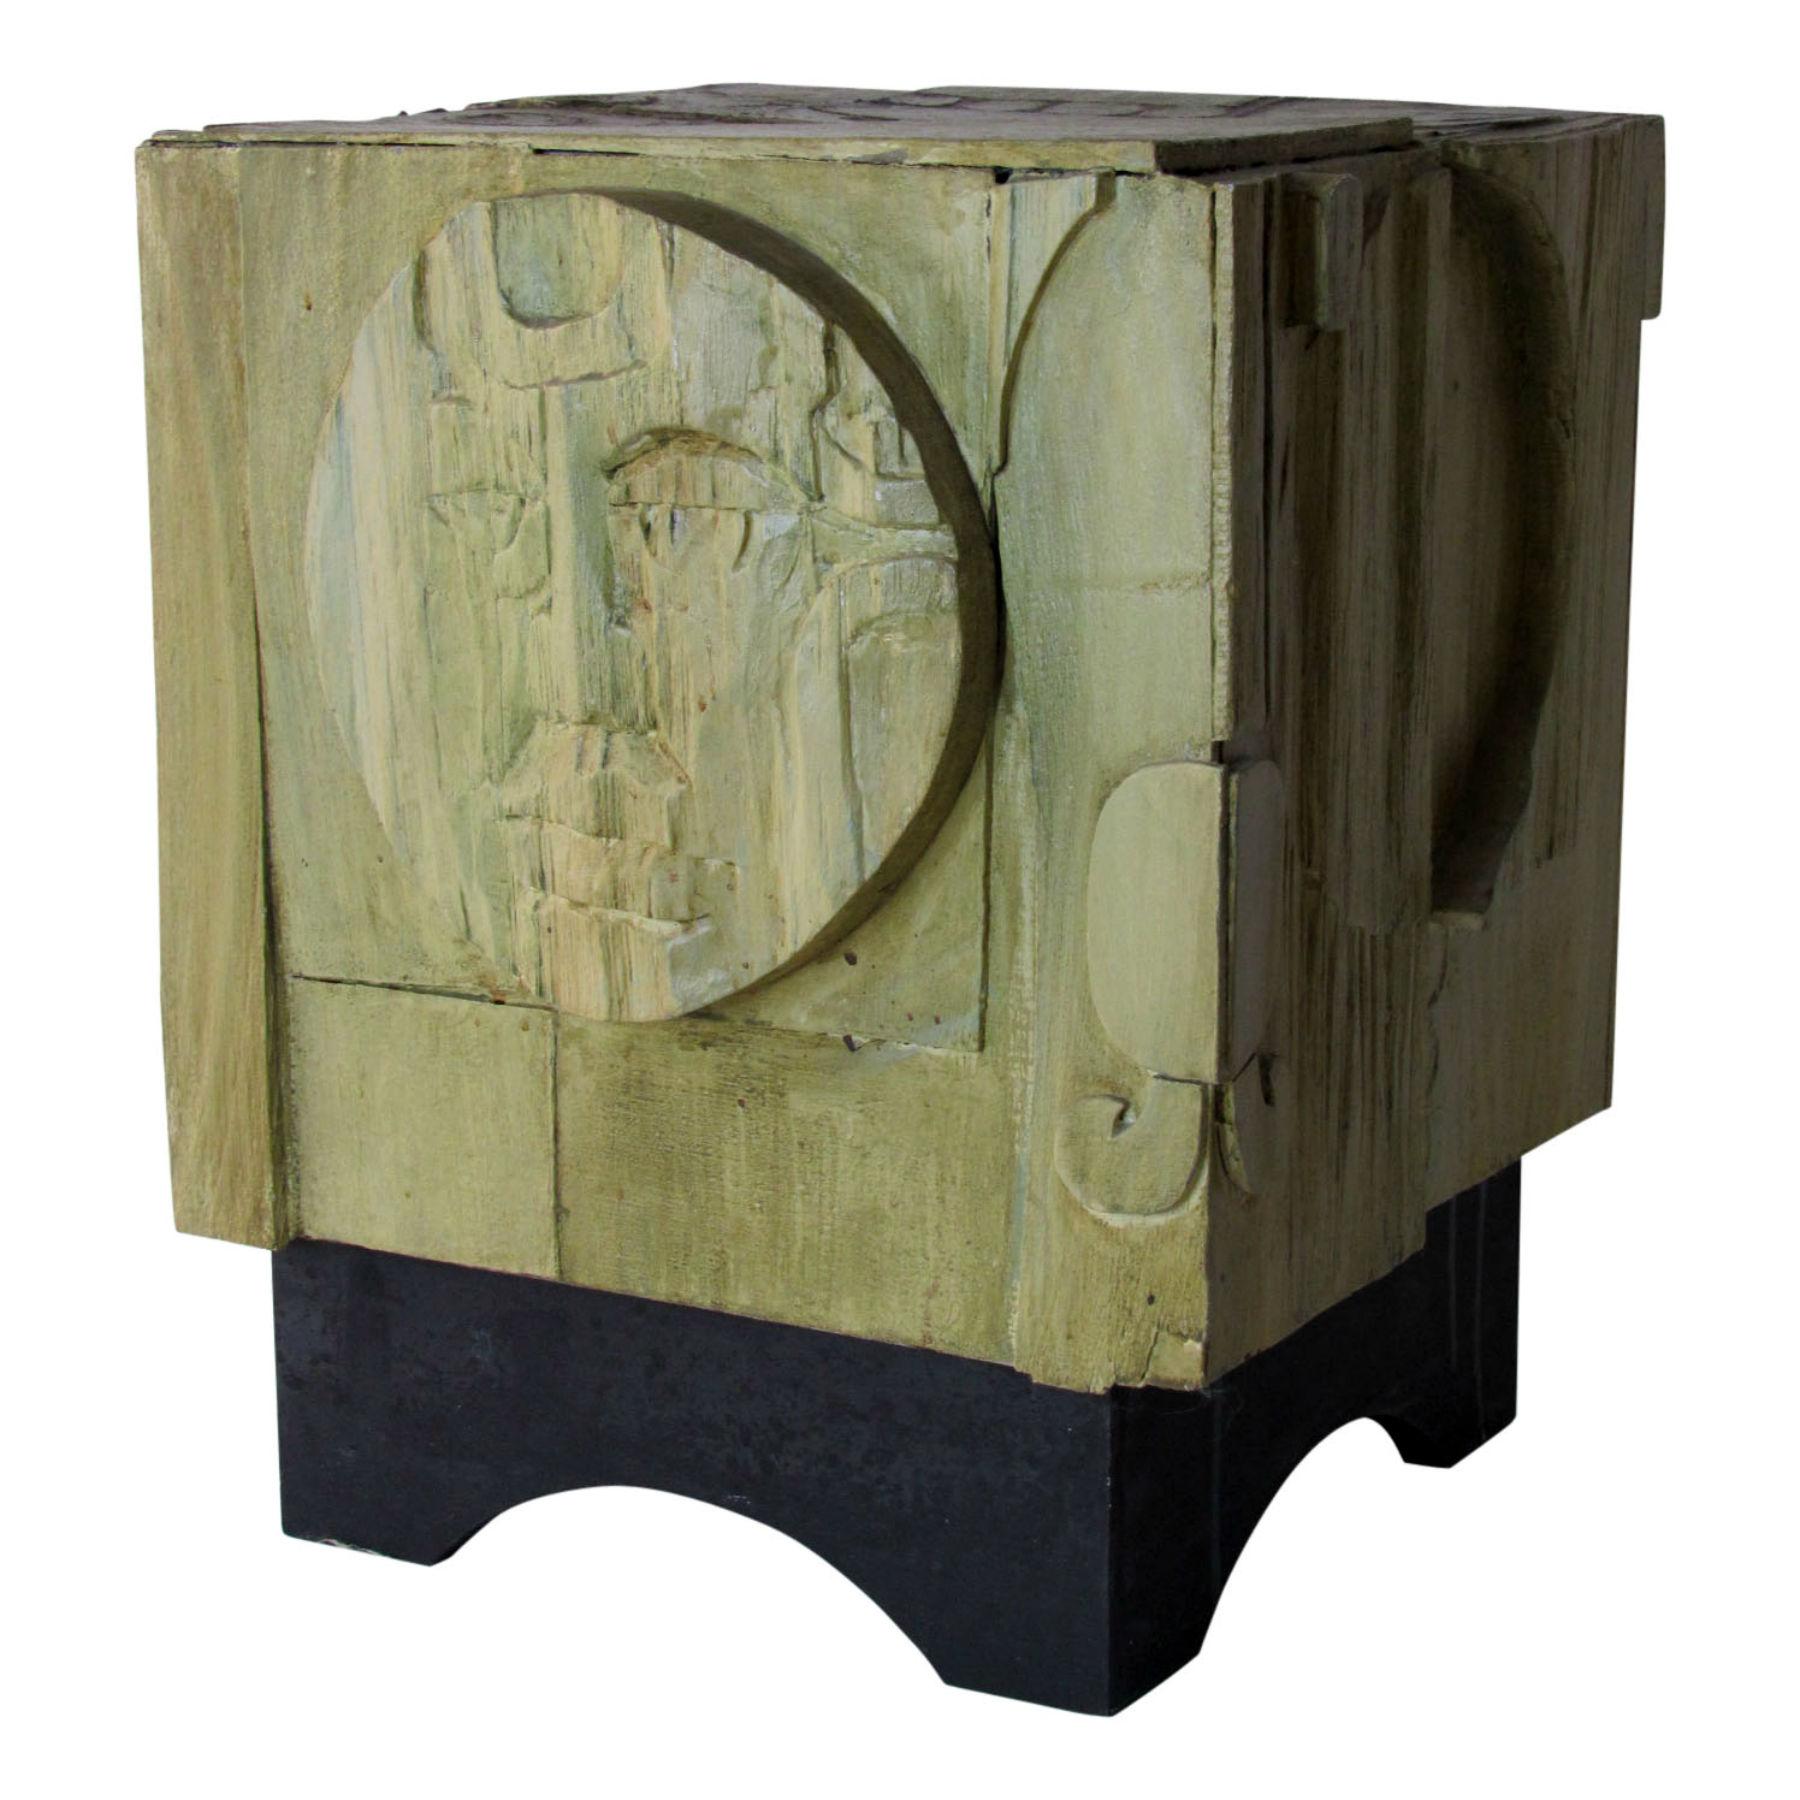 The Man in the Moon looks out from this mixed media cube made of carved wood panels and painted canvas.  Utterly charming and one of a kind, this cube was made in the 1970s by an unknown artist.  